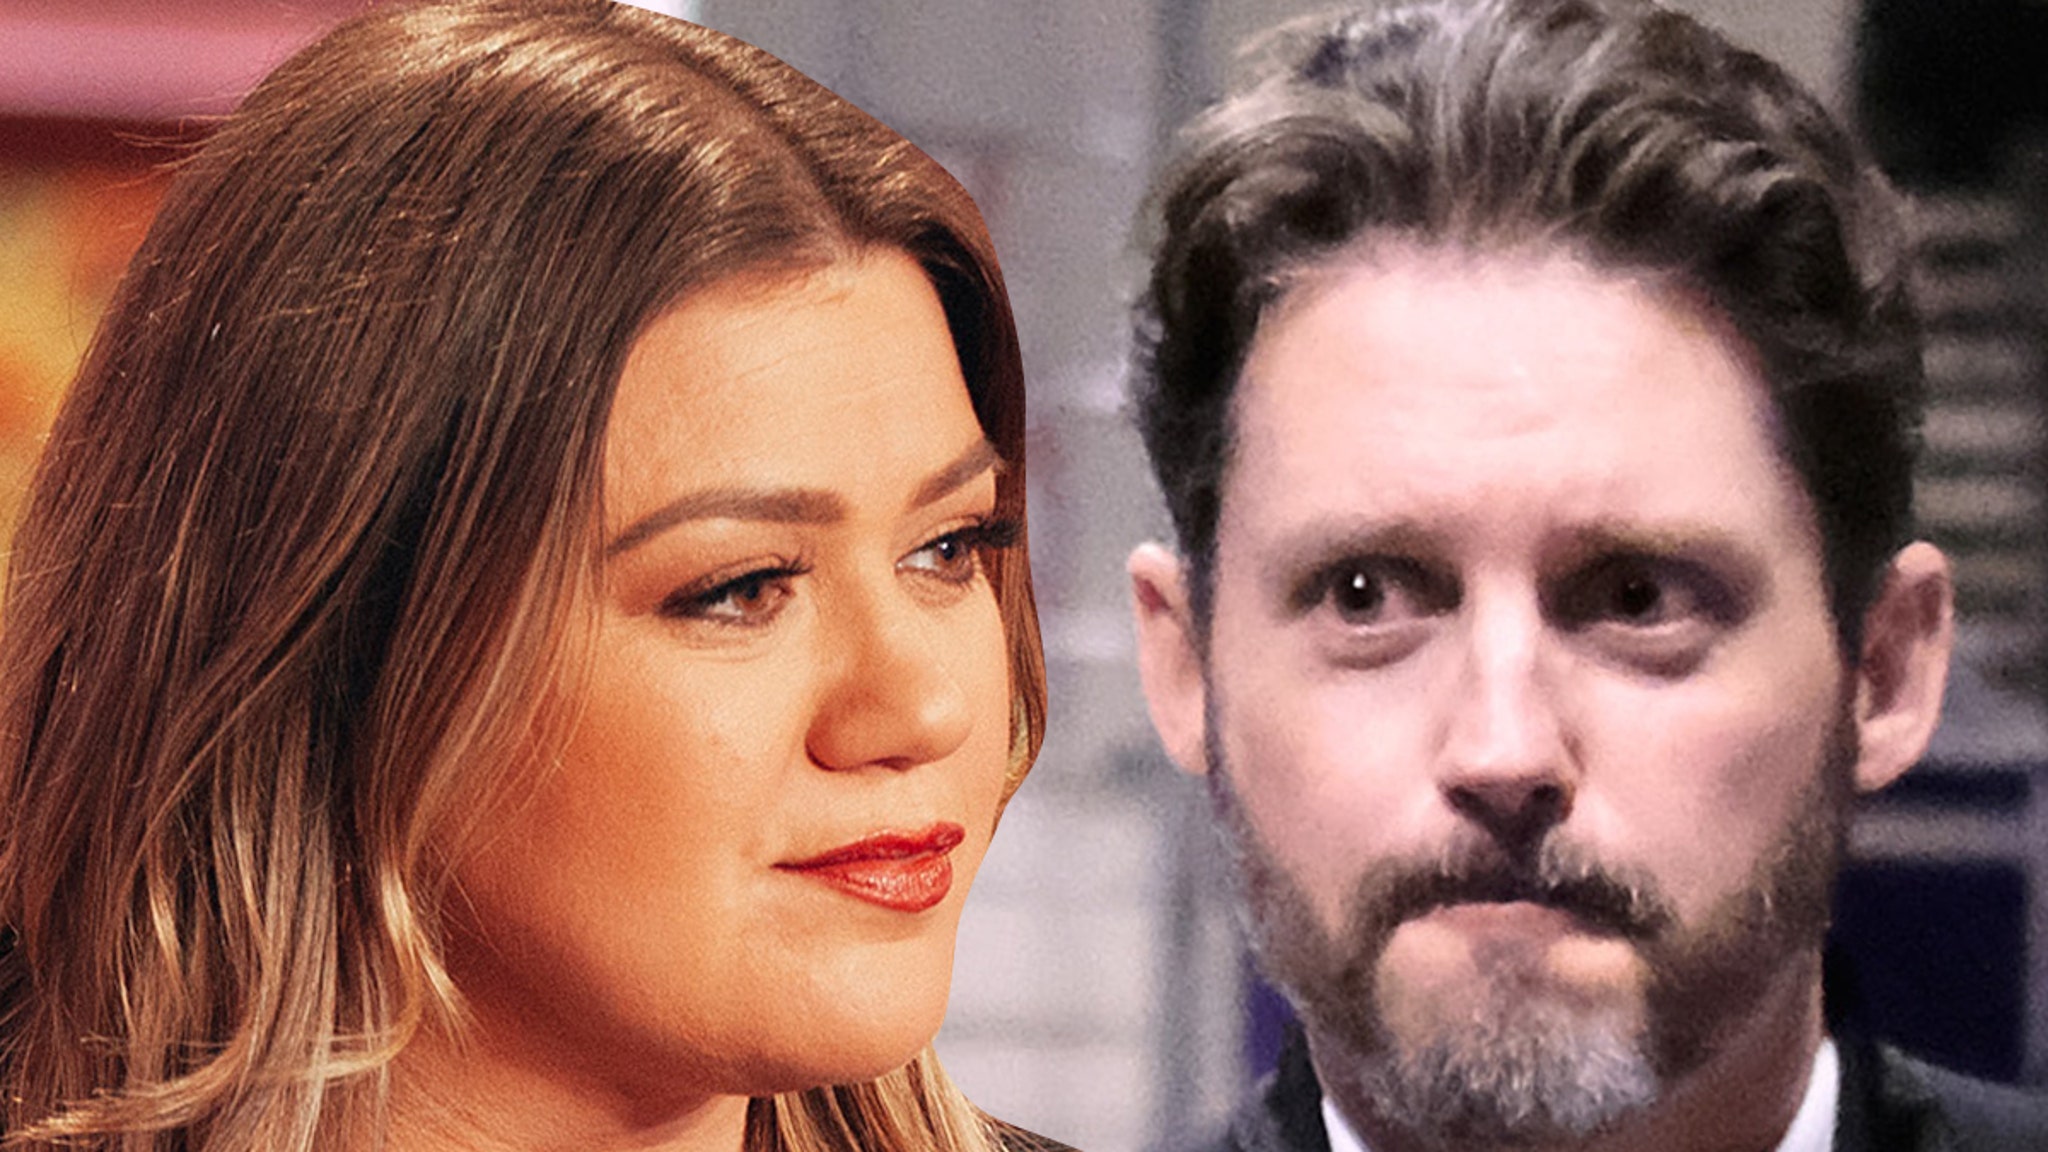 Kelly Clarkson Divorce Judge Rules the Montana Ranch is Hers, not ex-Husband's